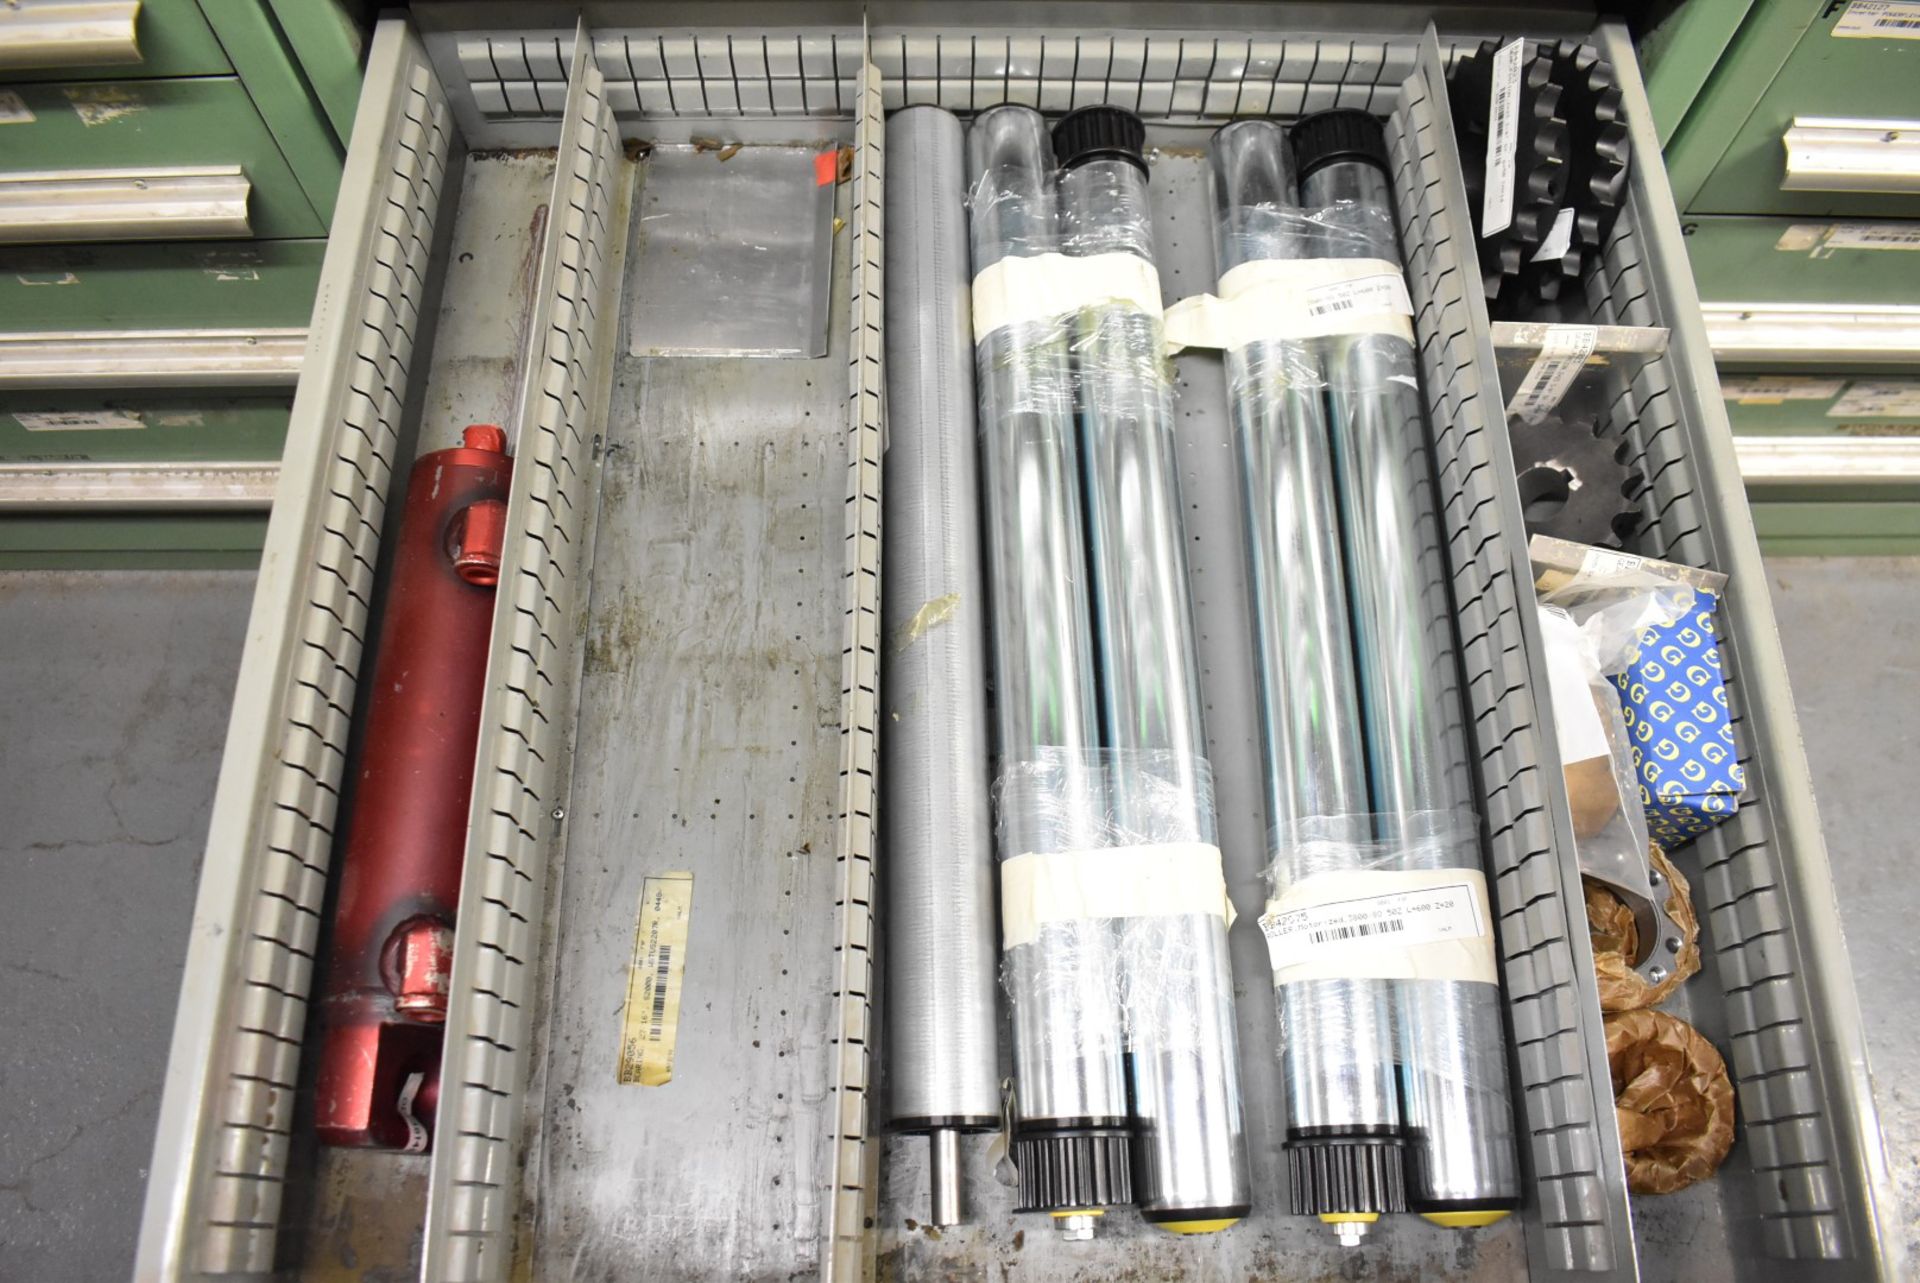 LOT/ CONTENTS OF CABINET - INCLUDING SPACERS, PRISMATIC SLIDER GUIDES, FESTO CYLINDERS, PULLEYS, - Image 6 of 7